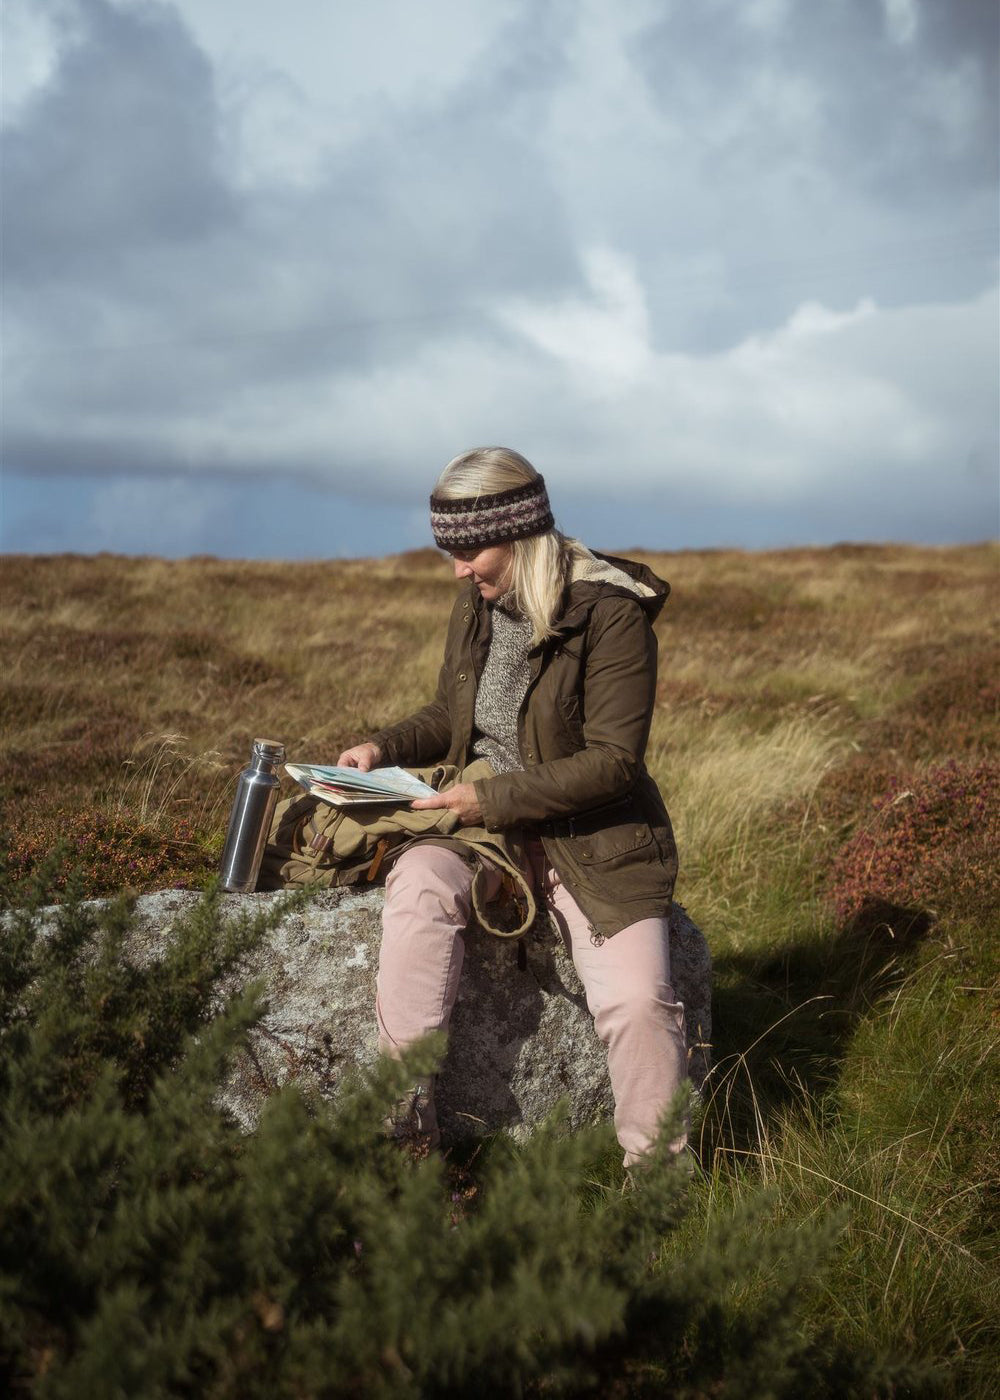 Myrtle knitted headband shown worn by Meg, the designer of the knitting pattern, sitting on a rock in the Scottish landscape.